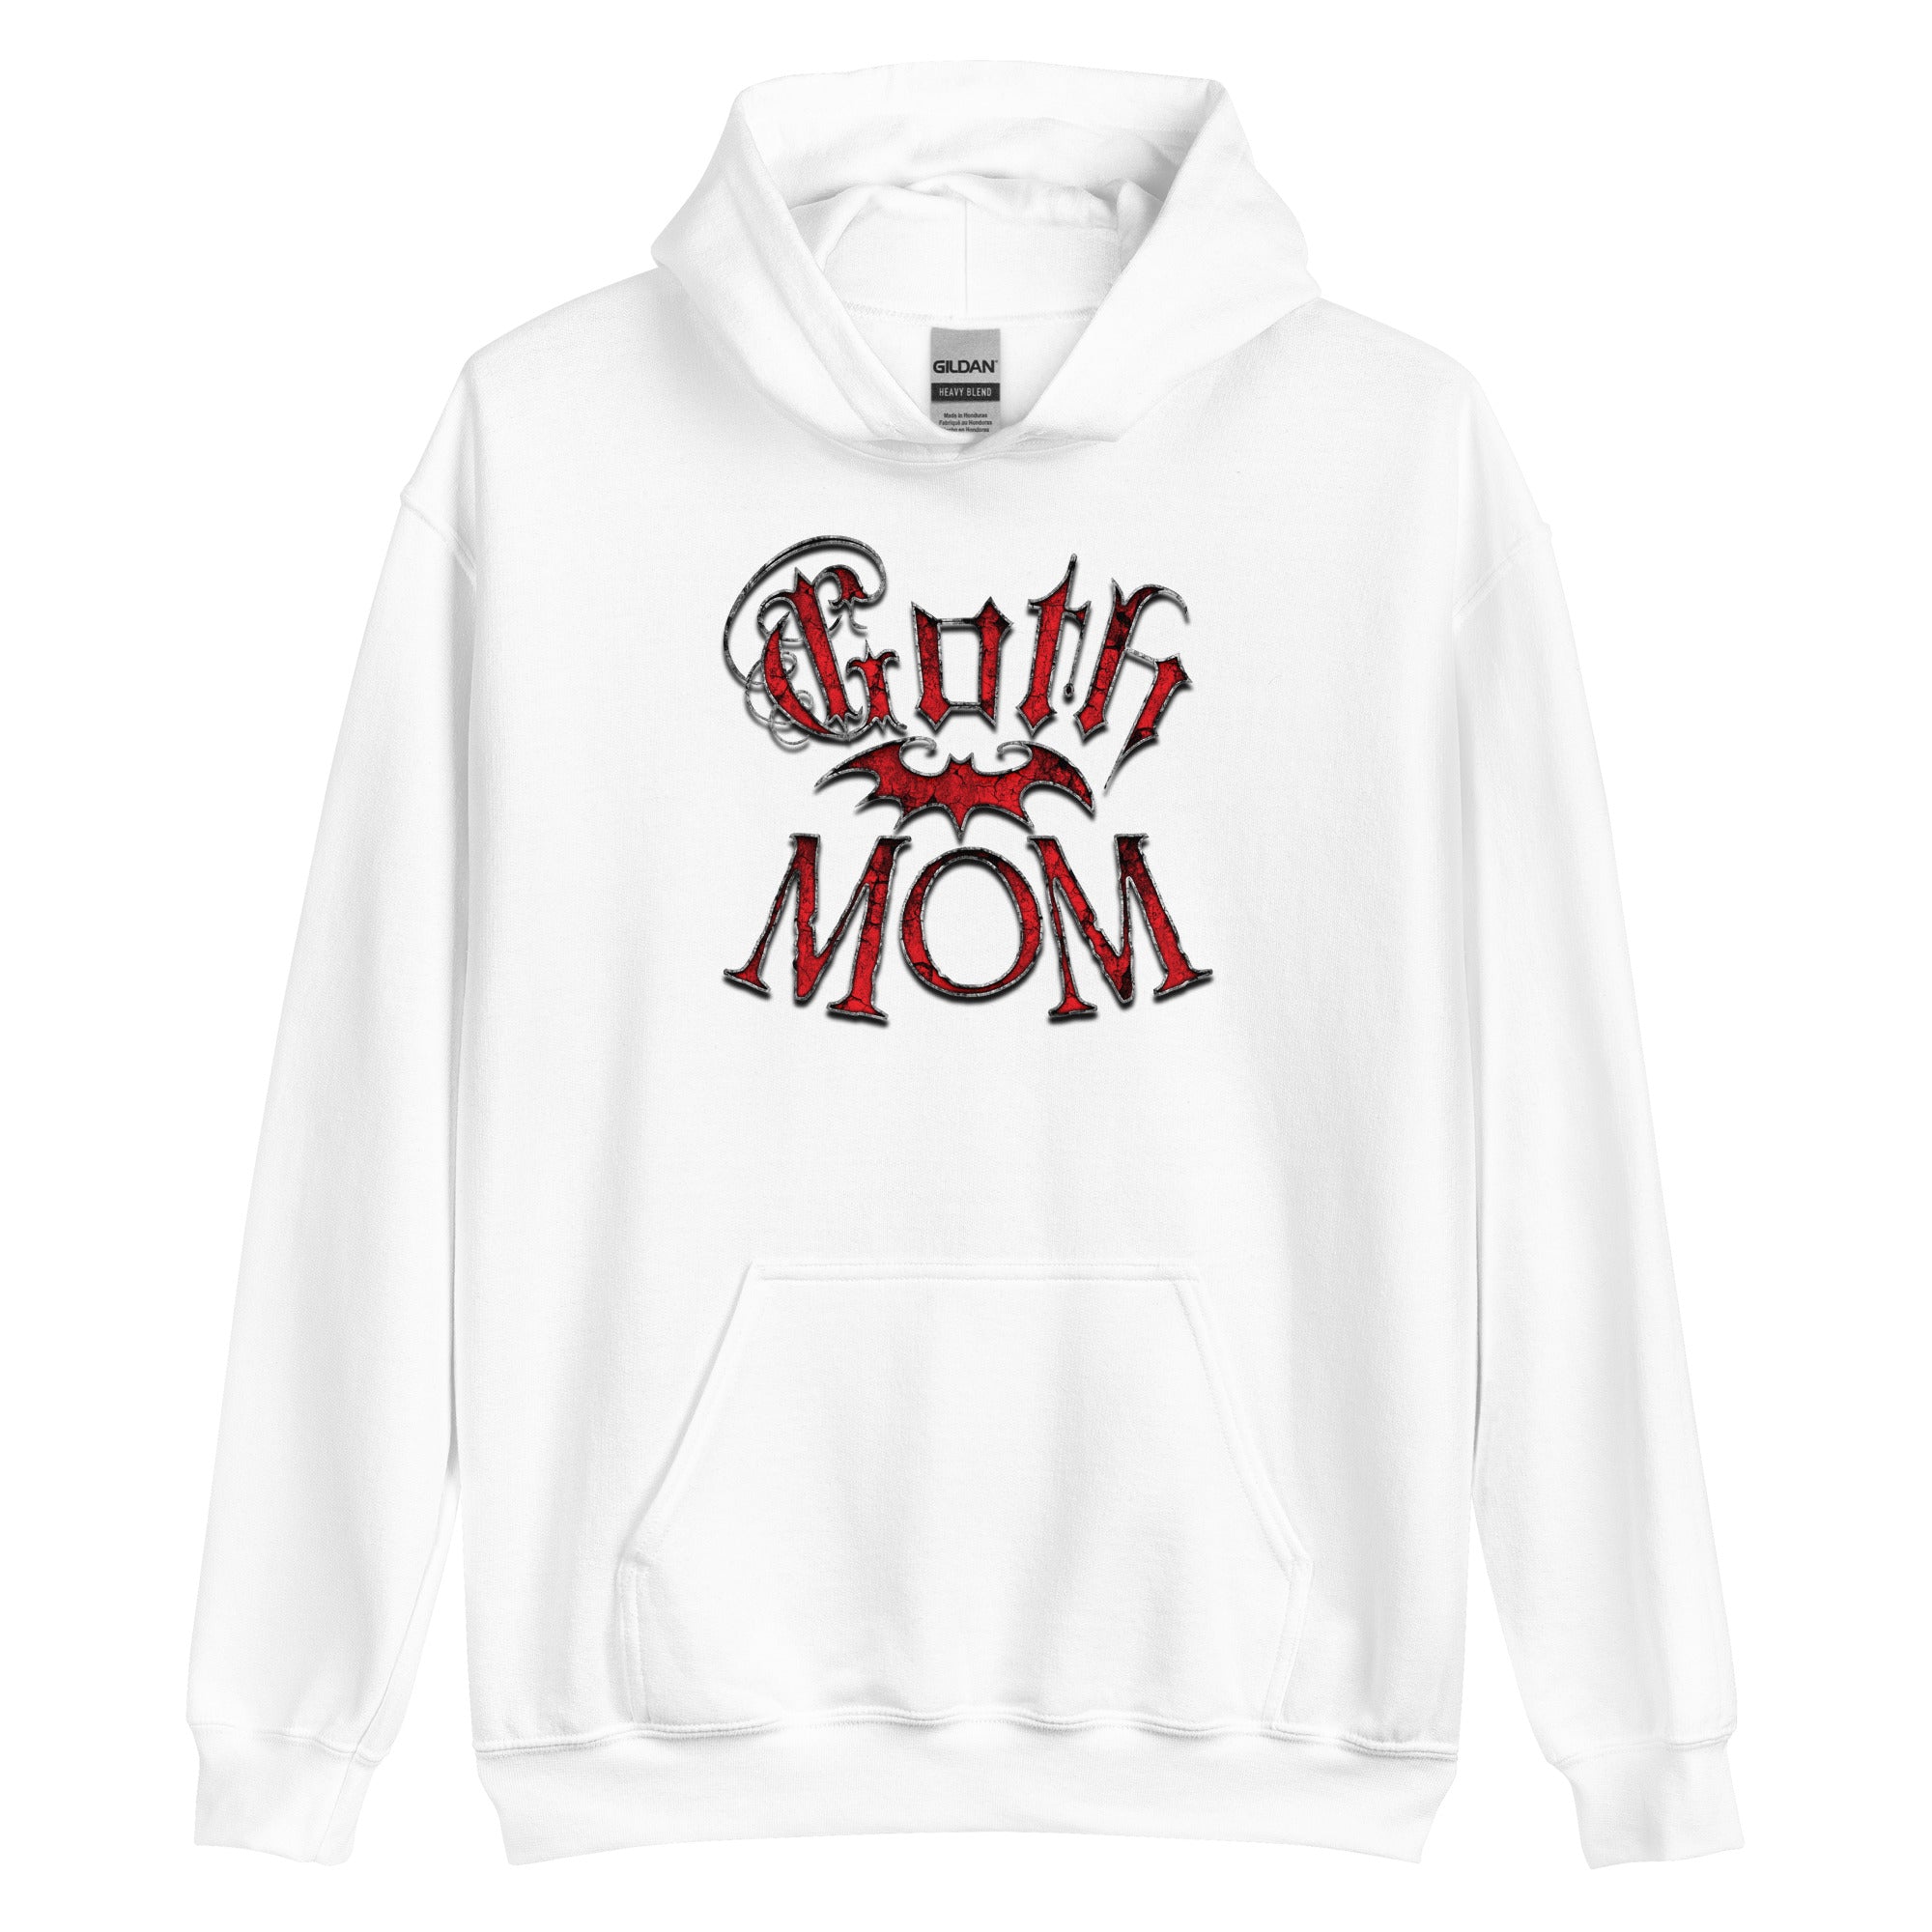 Red Goth Mom with Bat Mother's Day Unisex Hoodie Sweatshirt